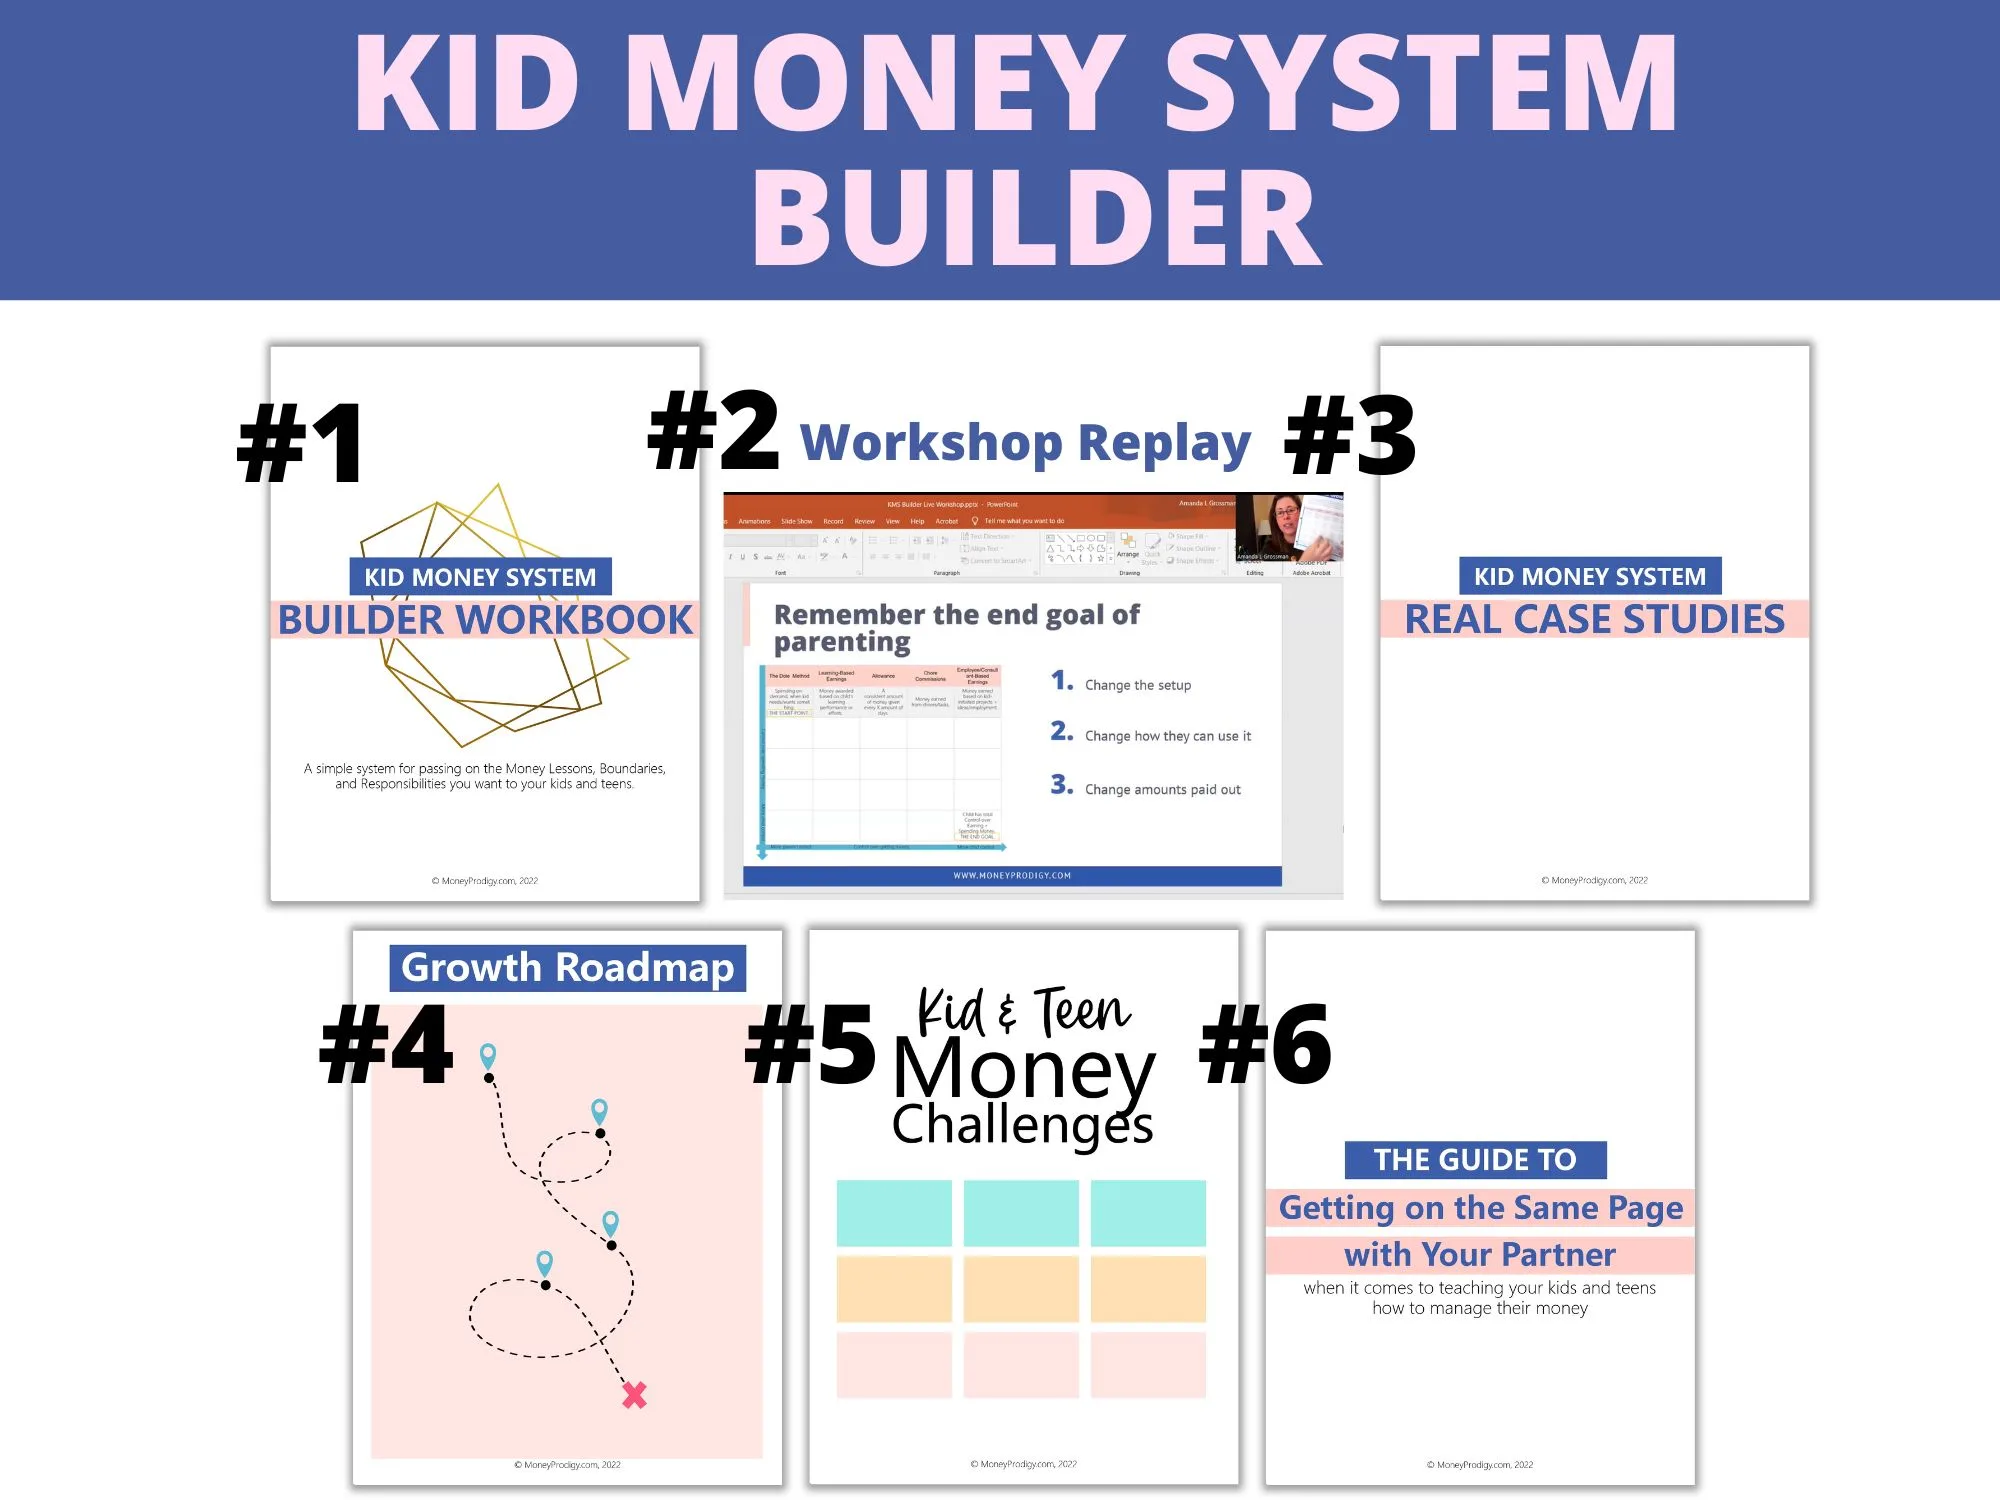 Kid Money System Builder graphic showing everything included in this product